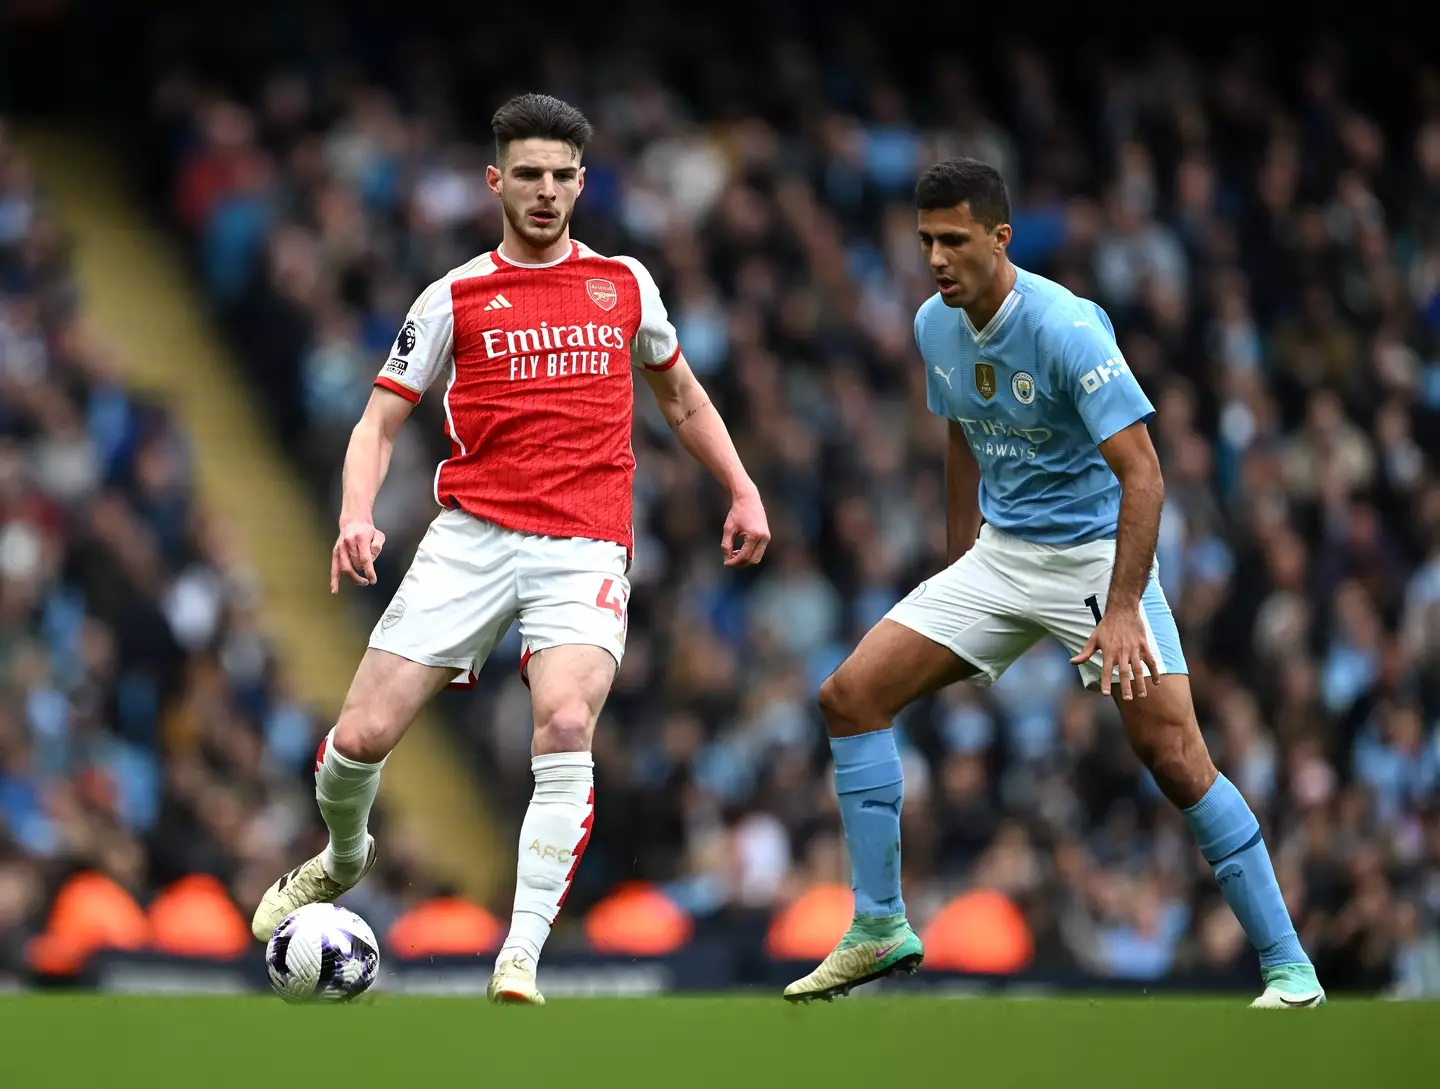 Declan Rice and Rodri in action during Manchester City vs. Arsenal. Image: Getty